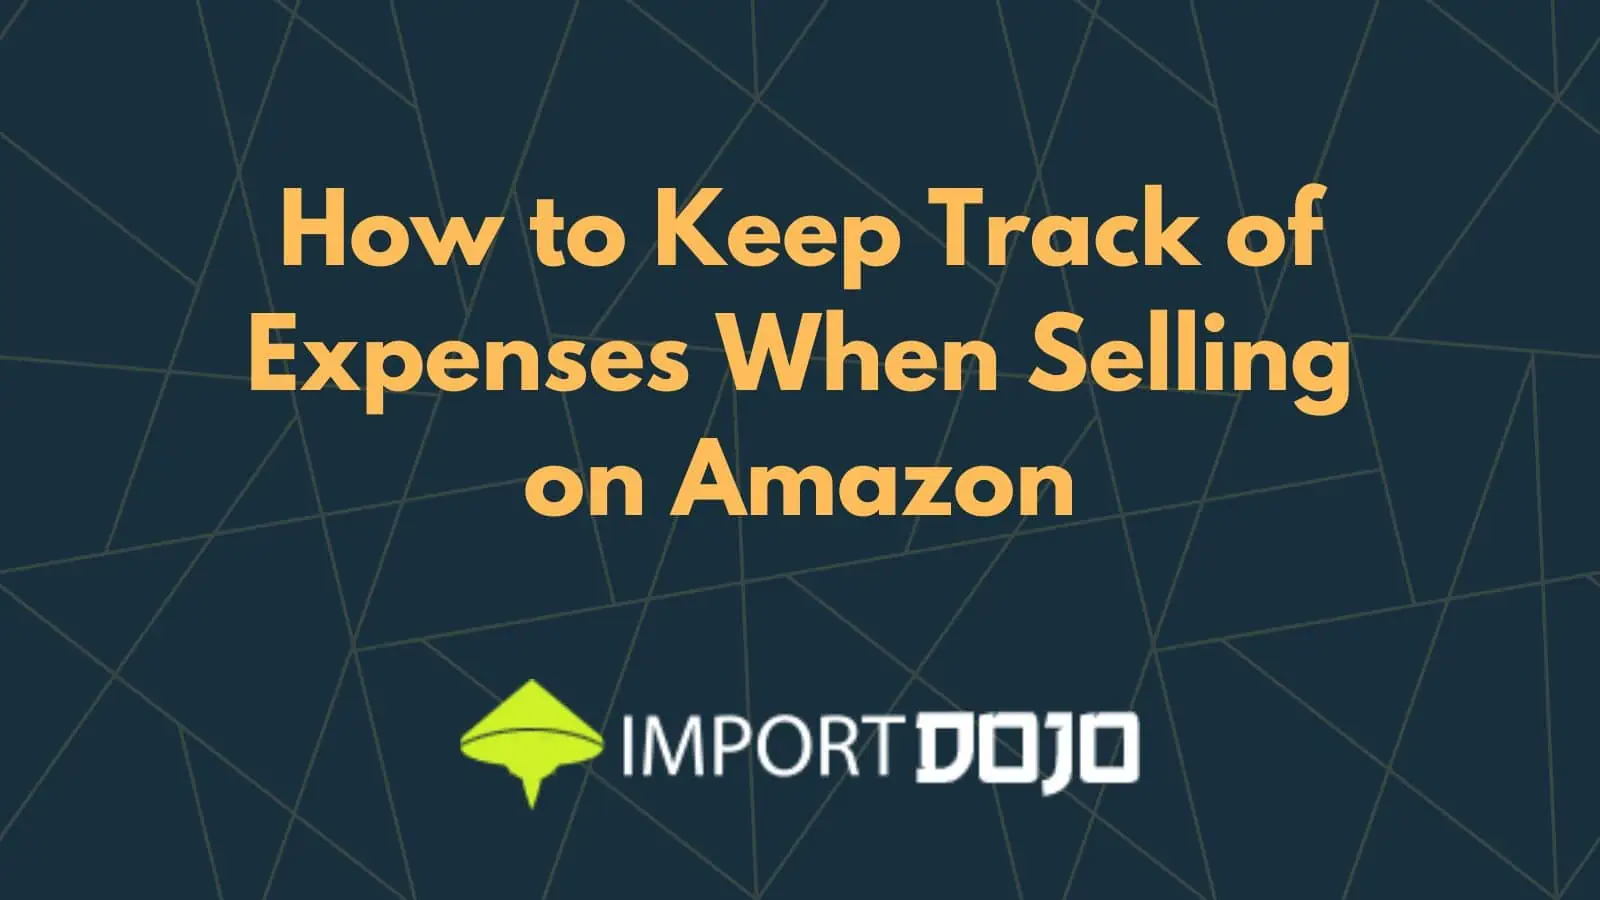 How to Keep Track of Expenses When Selling on Amazon